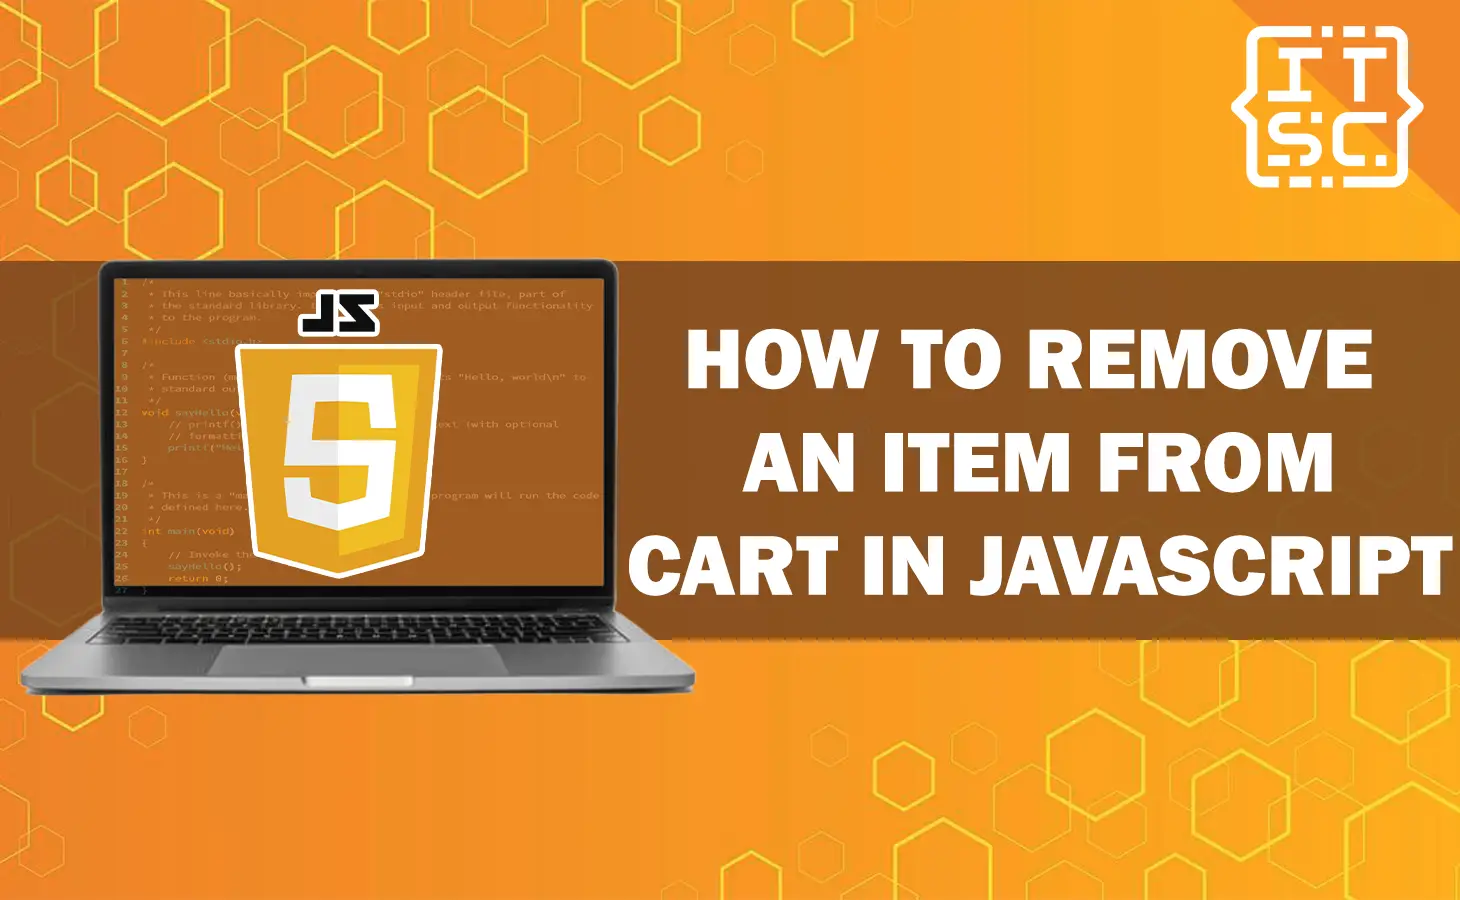 How to Remove an Item from Cart in JavaScript